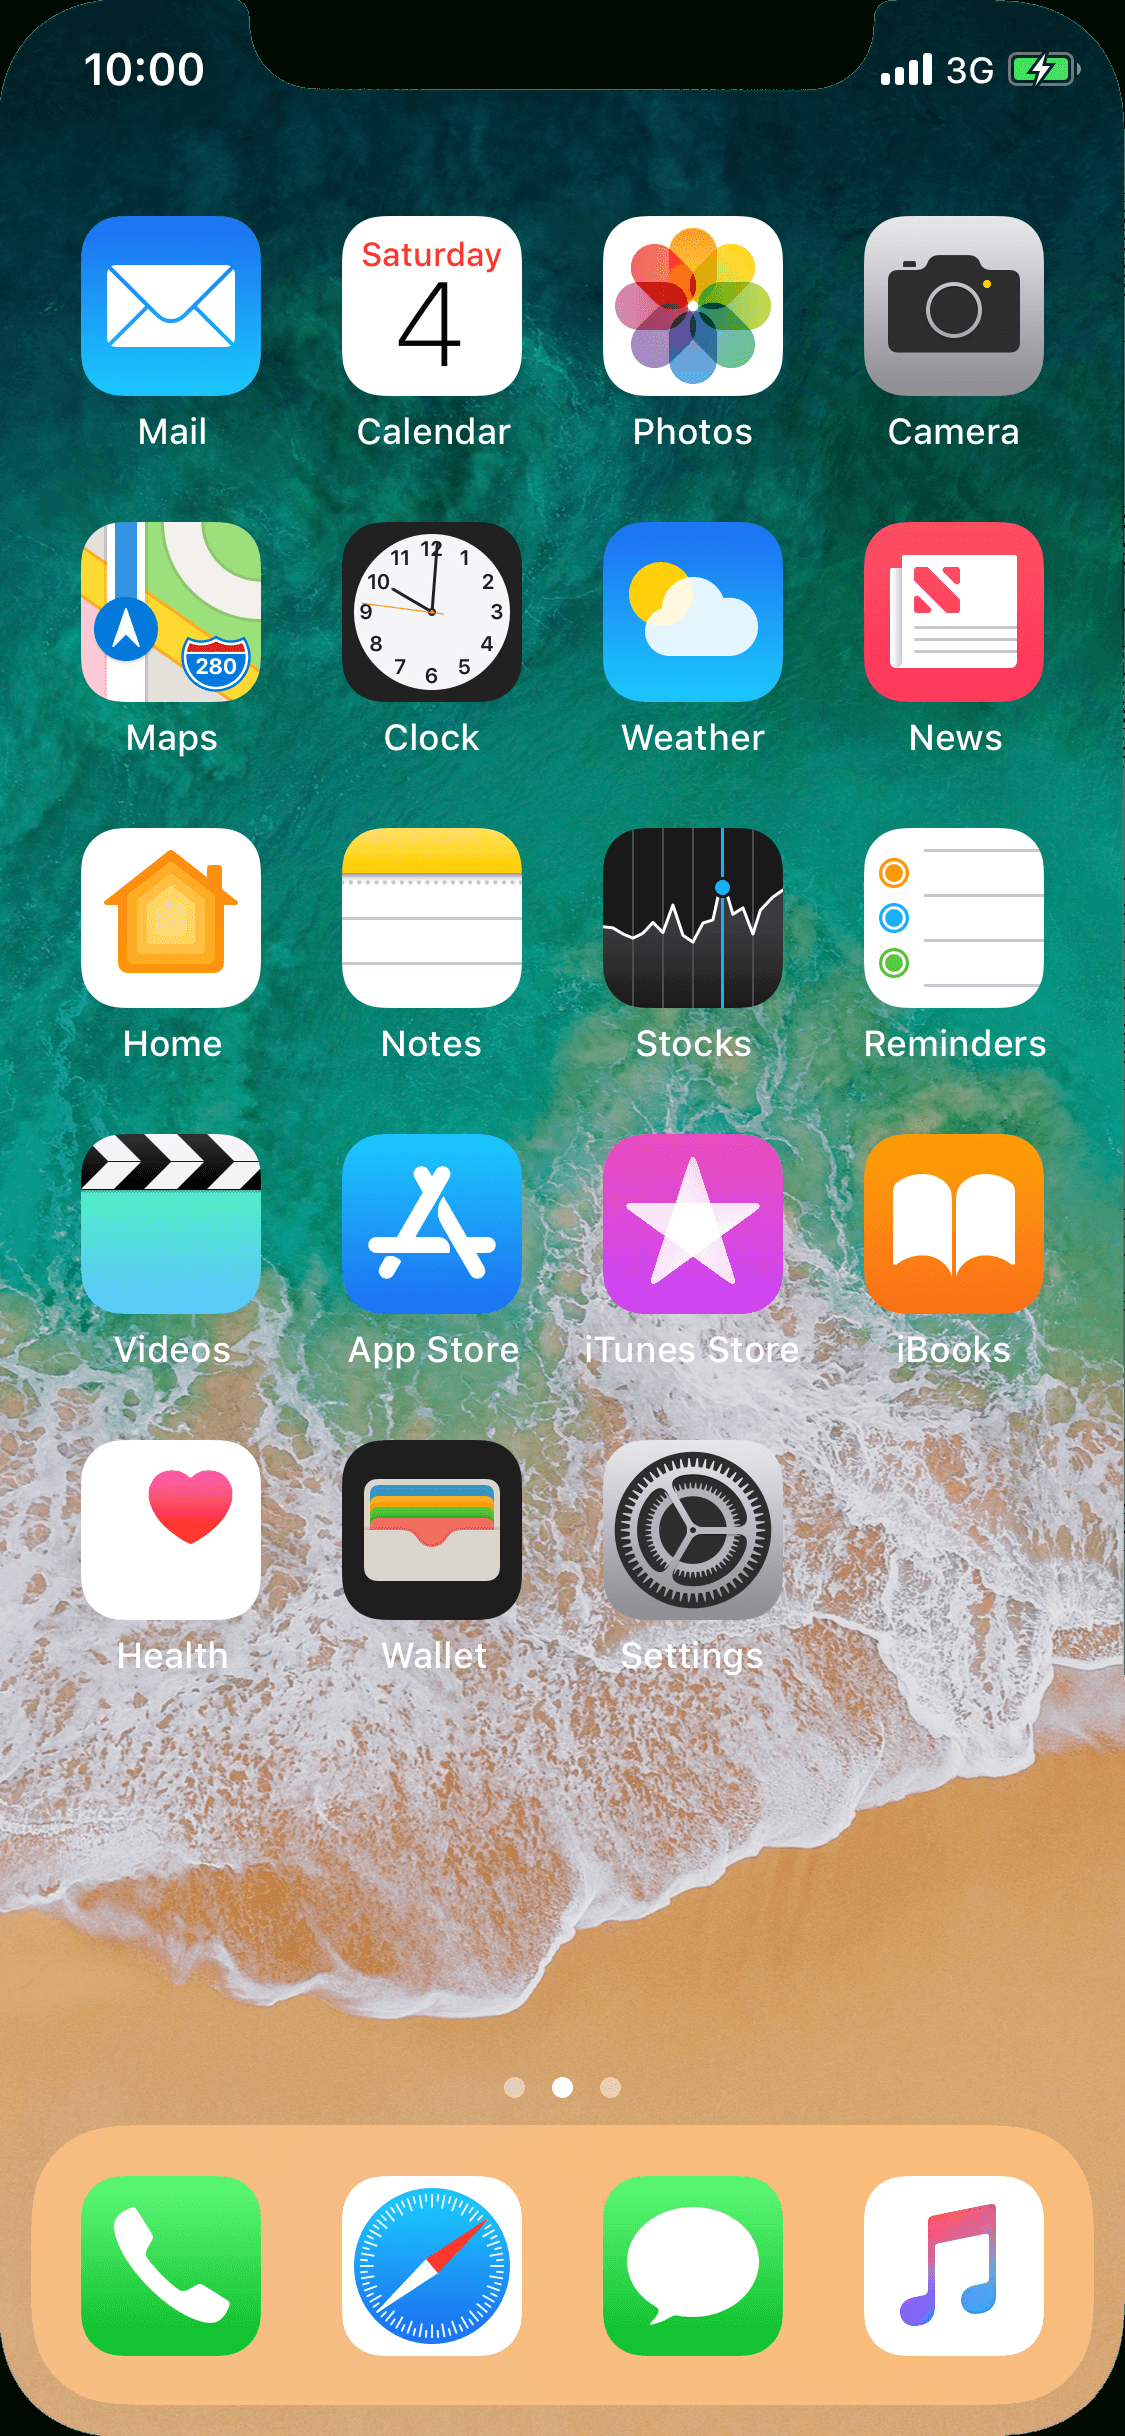 List Of Screen Icons  Apple Iphone X (Ios 11.1)  Telstra for Glyphicon-Calendar Icon Not Showing